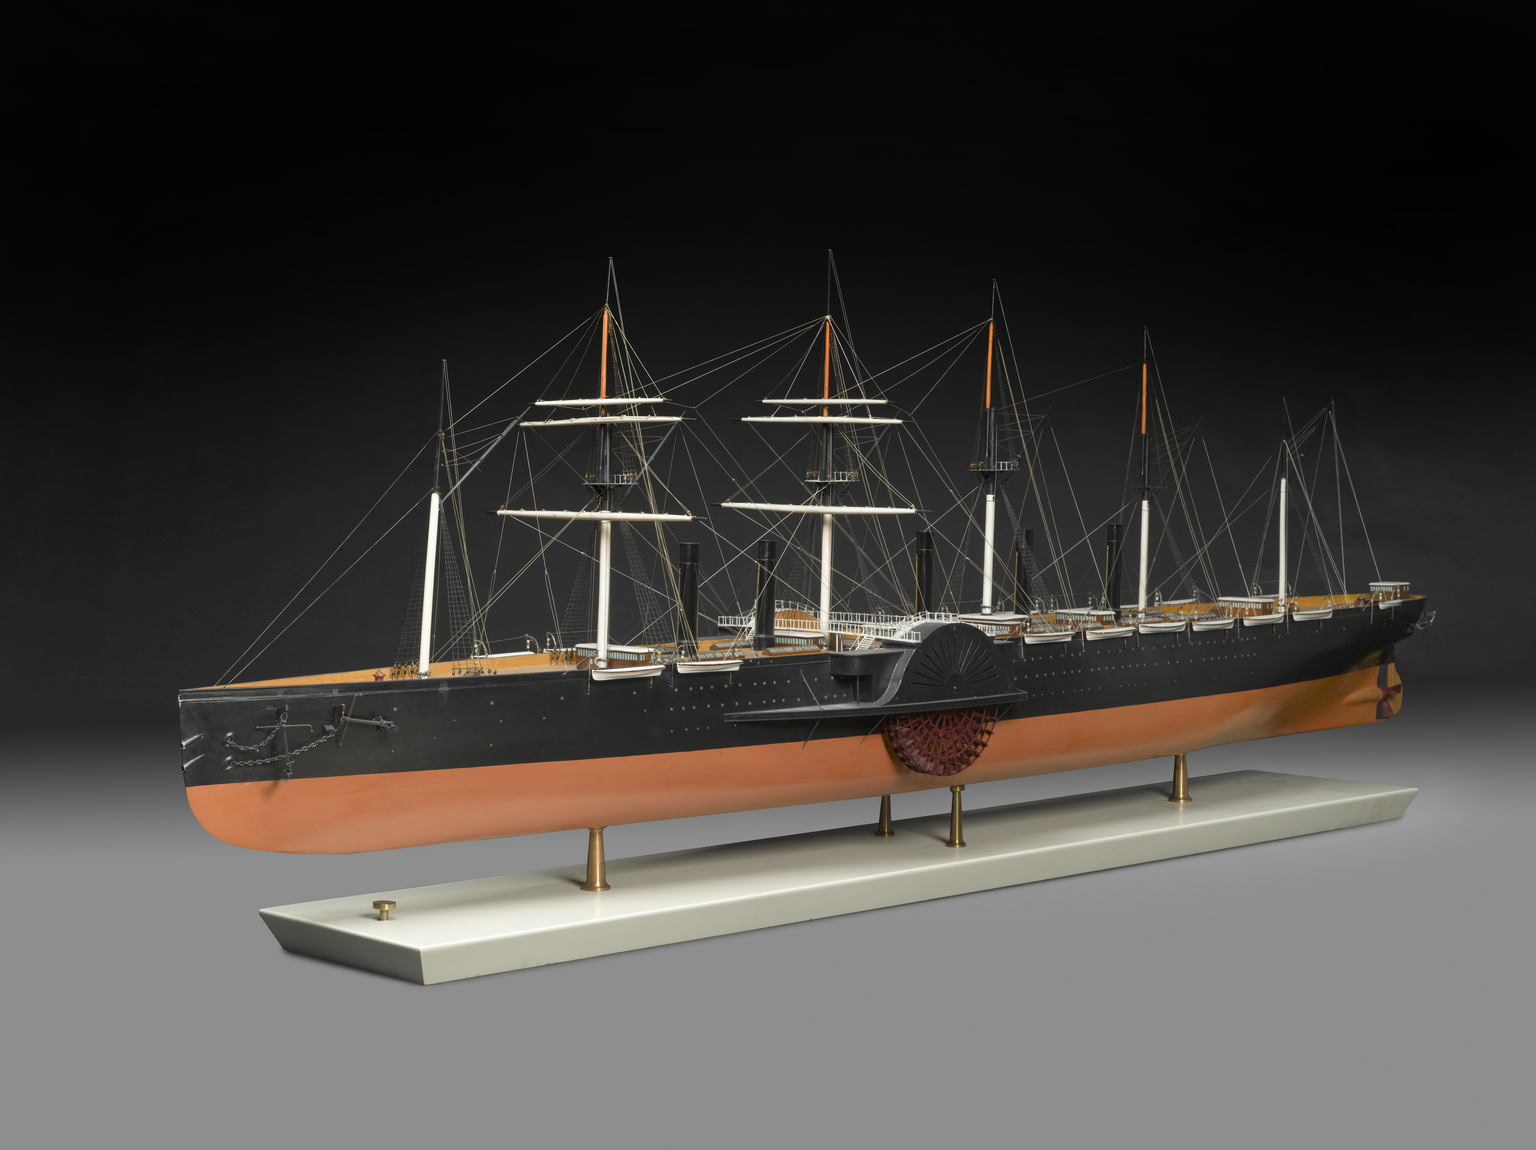 For comparison, this object (a model of the SS Great Eastern, 1857-101) has been prepared for display. 